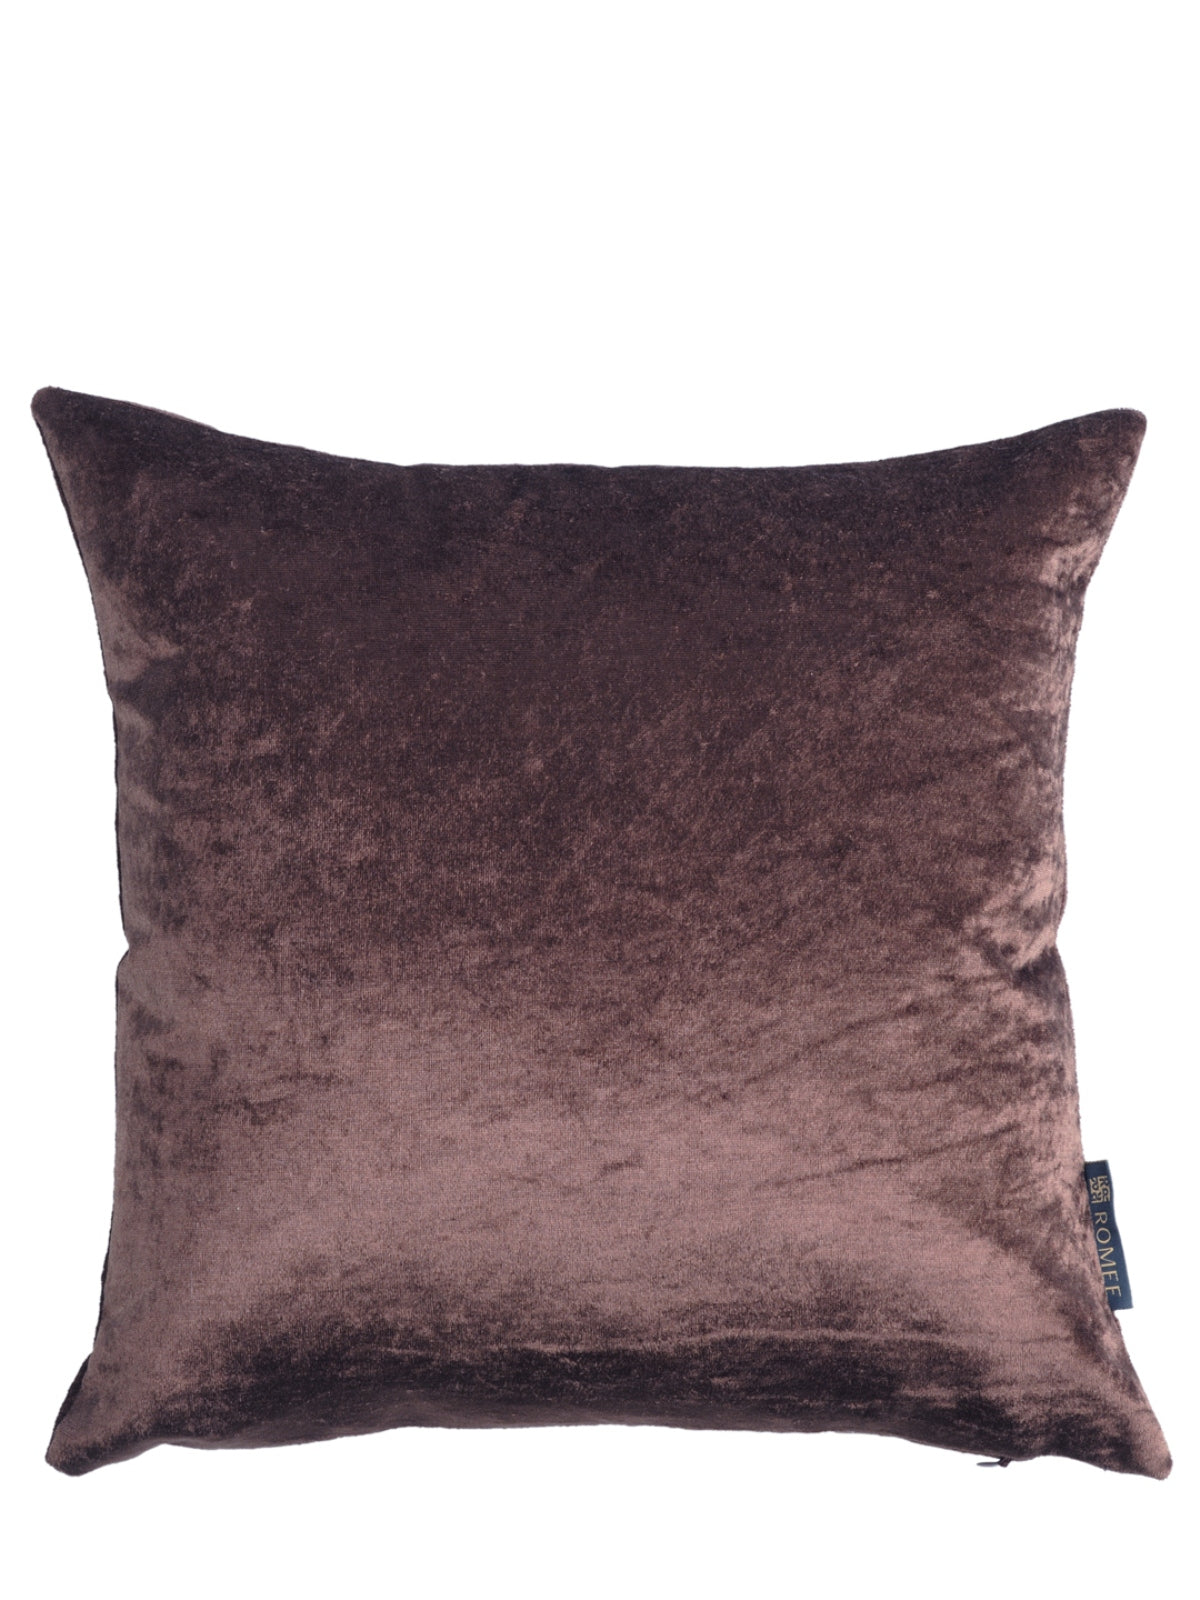 Soft Velvet Febric Solid Plain Cushion Covers 16x16 inch, Set of 5 - Brown